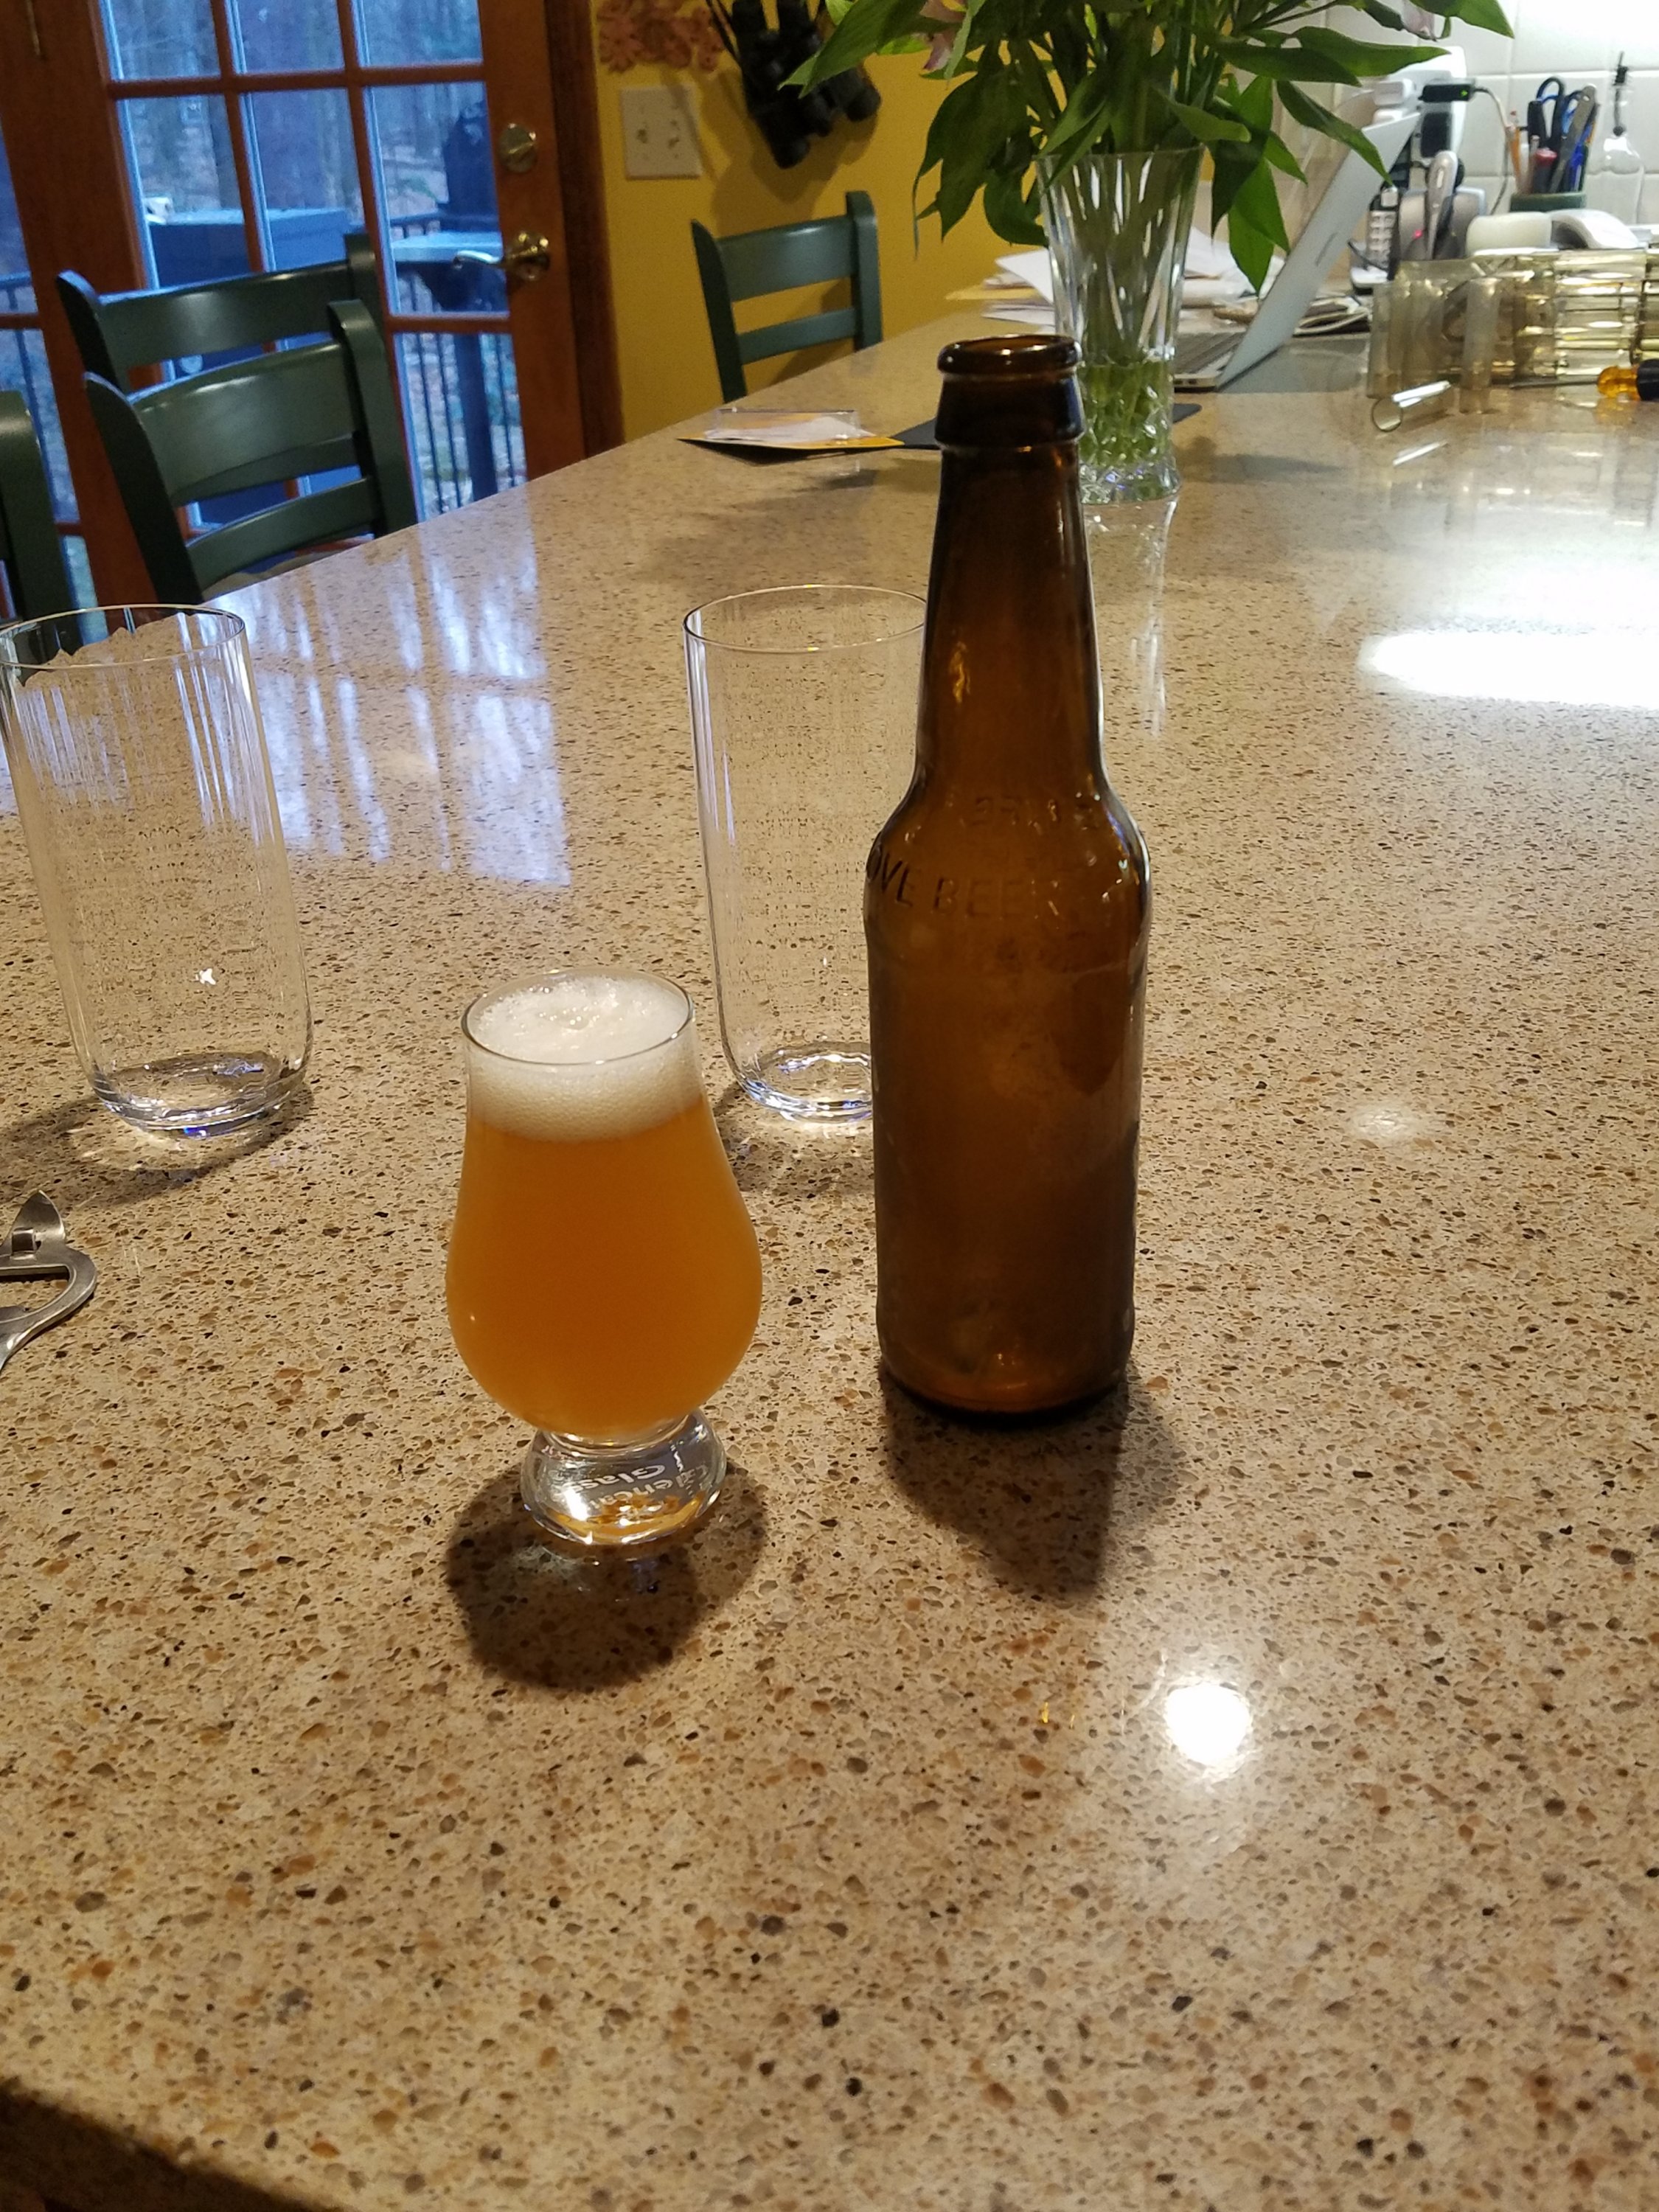 My Forst Beer - American IPA 1 Gallon Batch